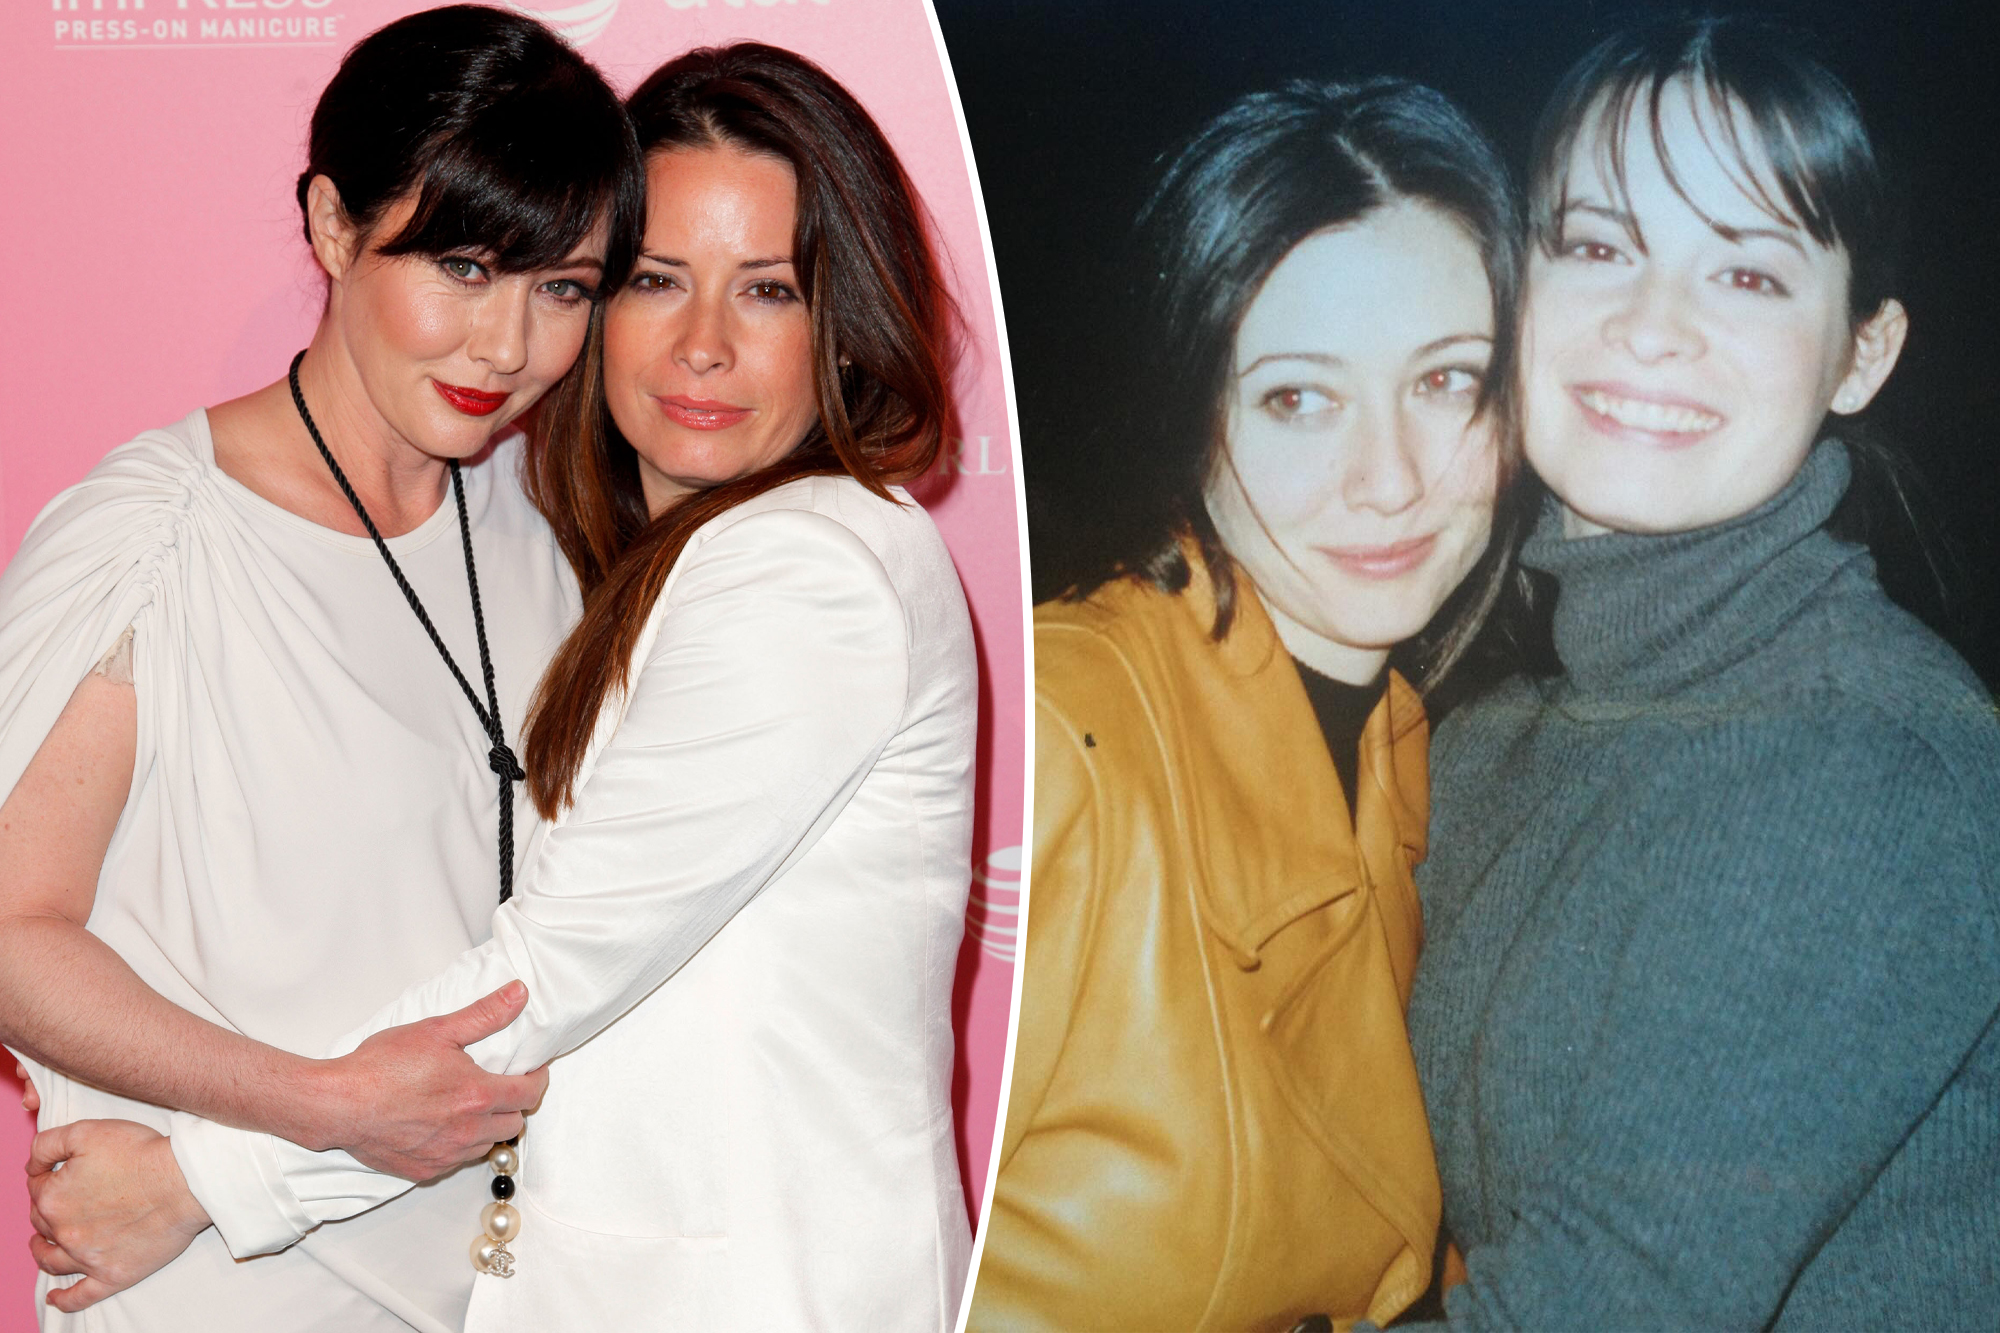 Heartfelt Tribute: Holly Marie Combs Remembers Shannen Doherty, Her 